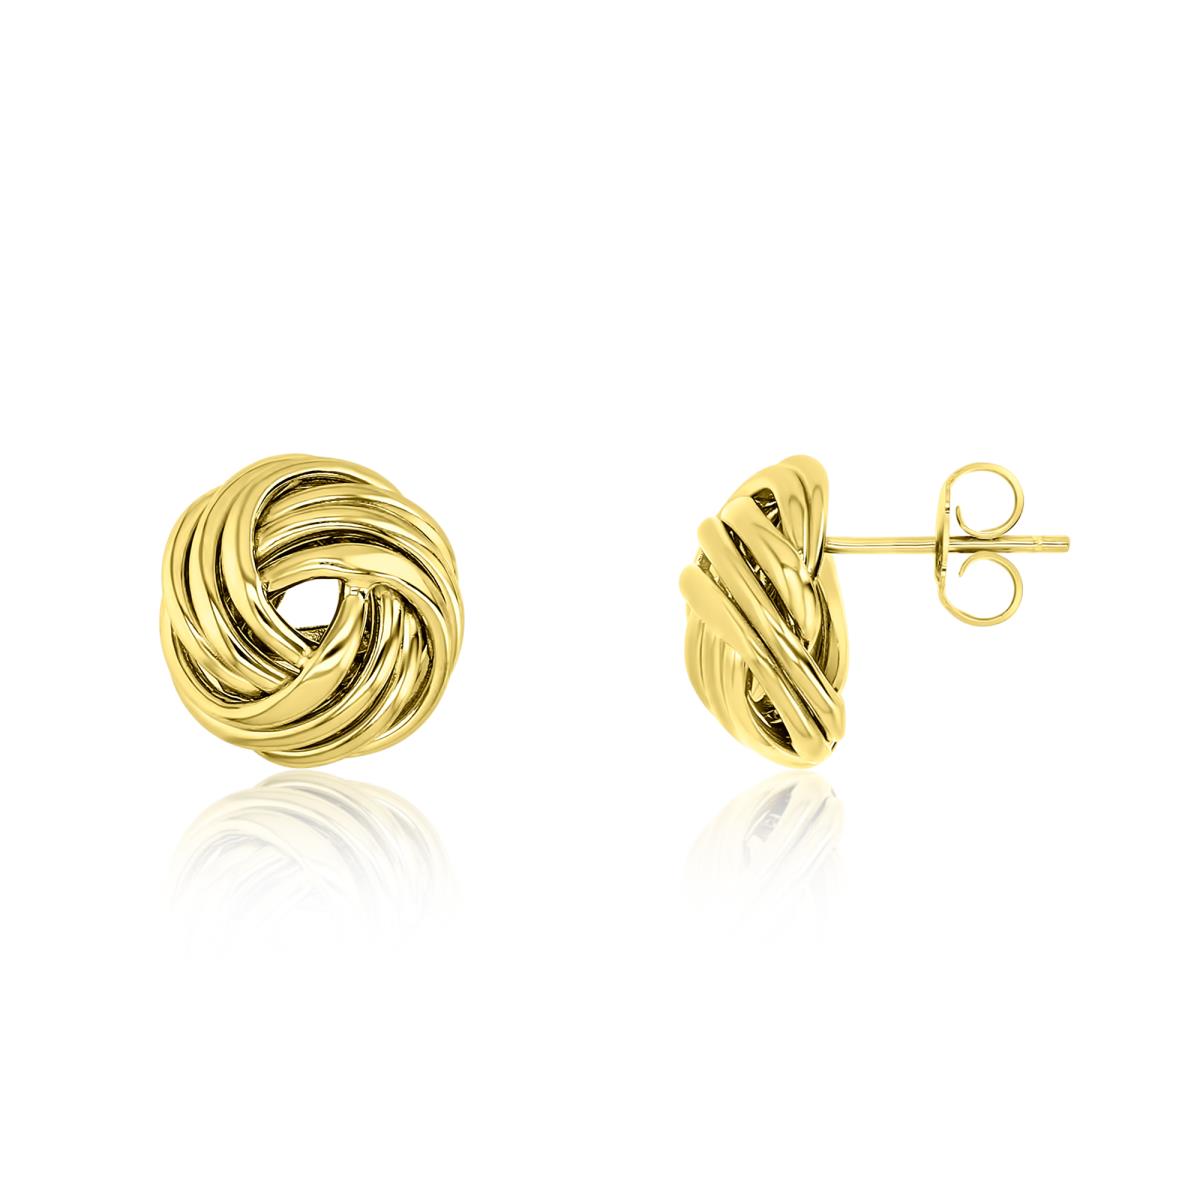 10K Yellow Gold 12X6mm Polished Love Knot Stud Earrings